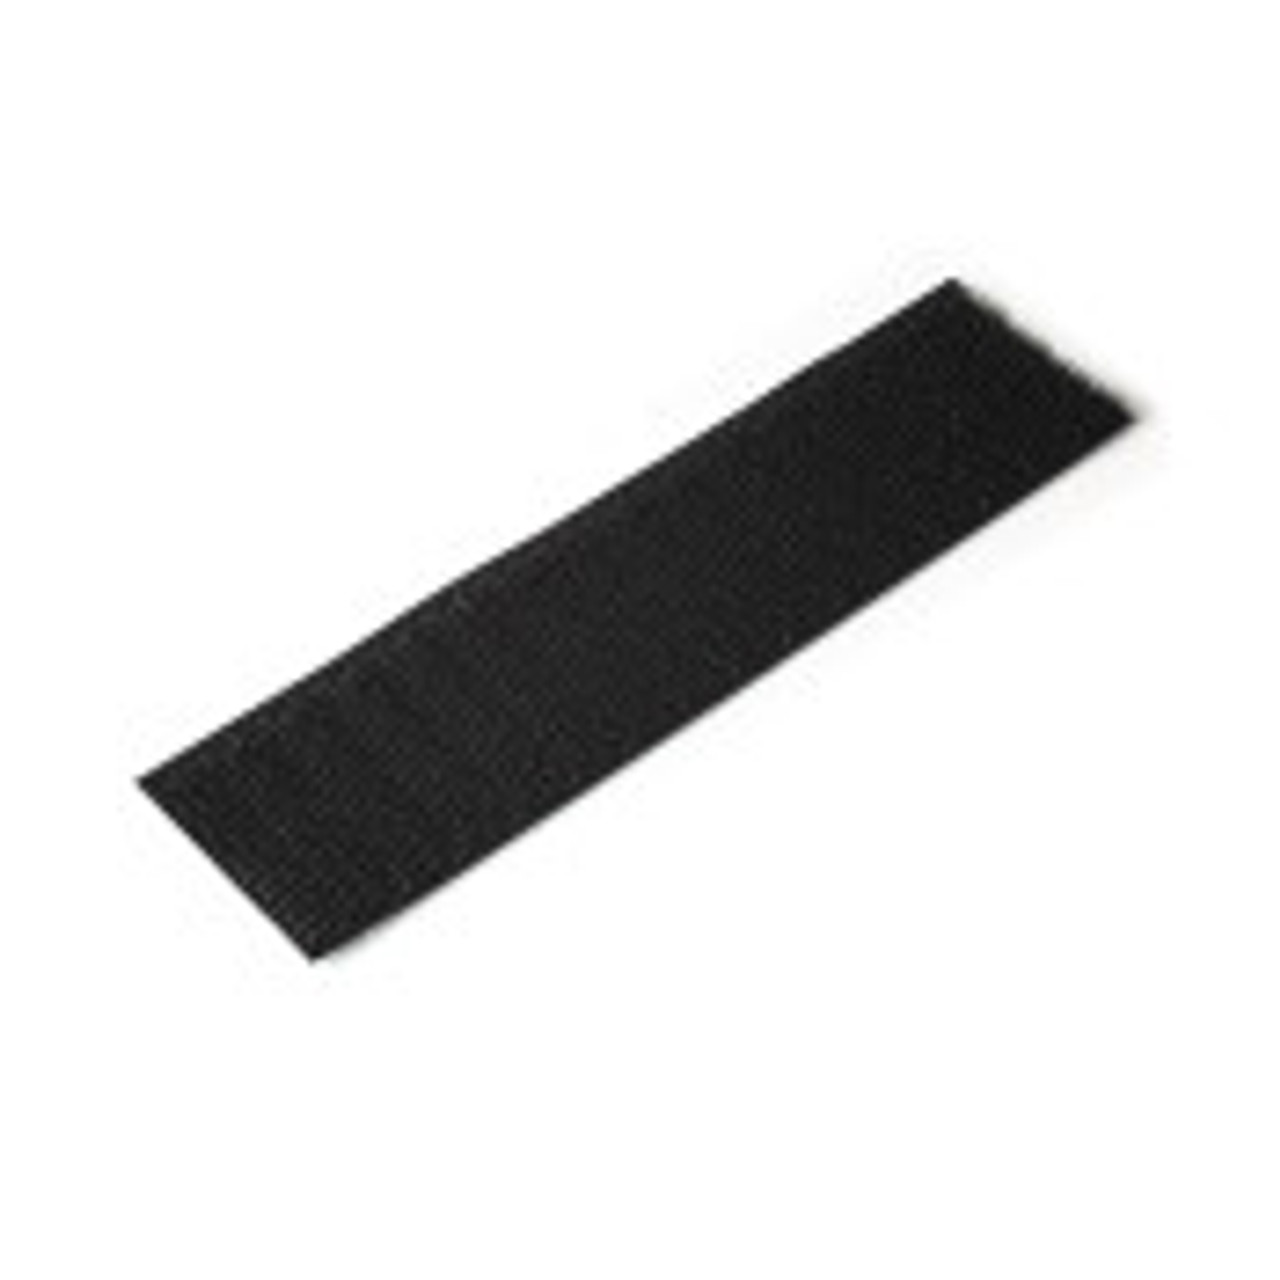 VELCRO® Brand Hook or Loop For High Temps 1 1/2